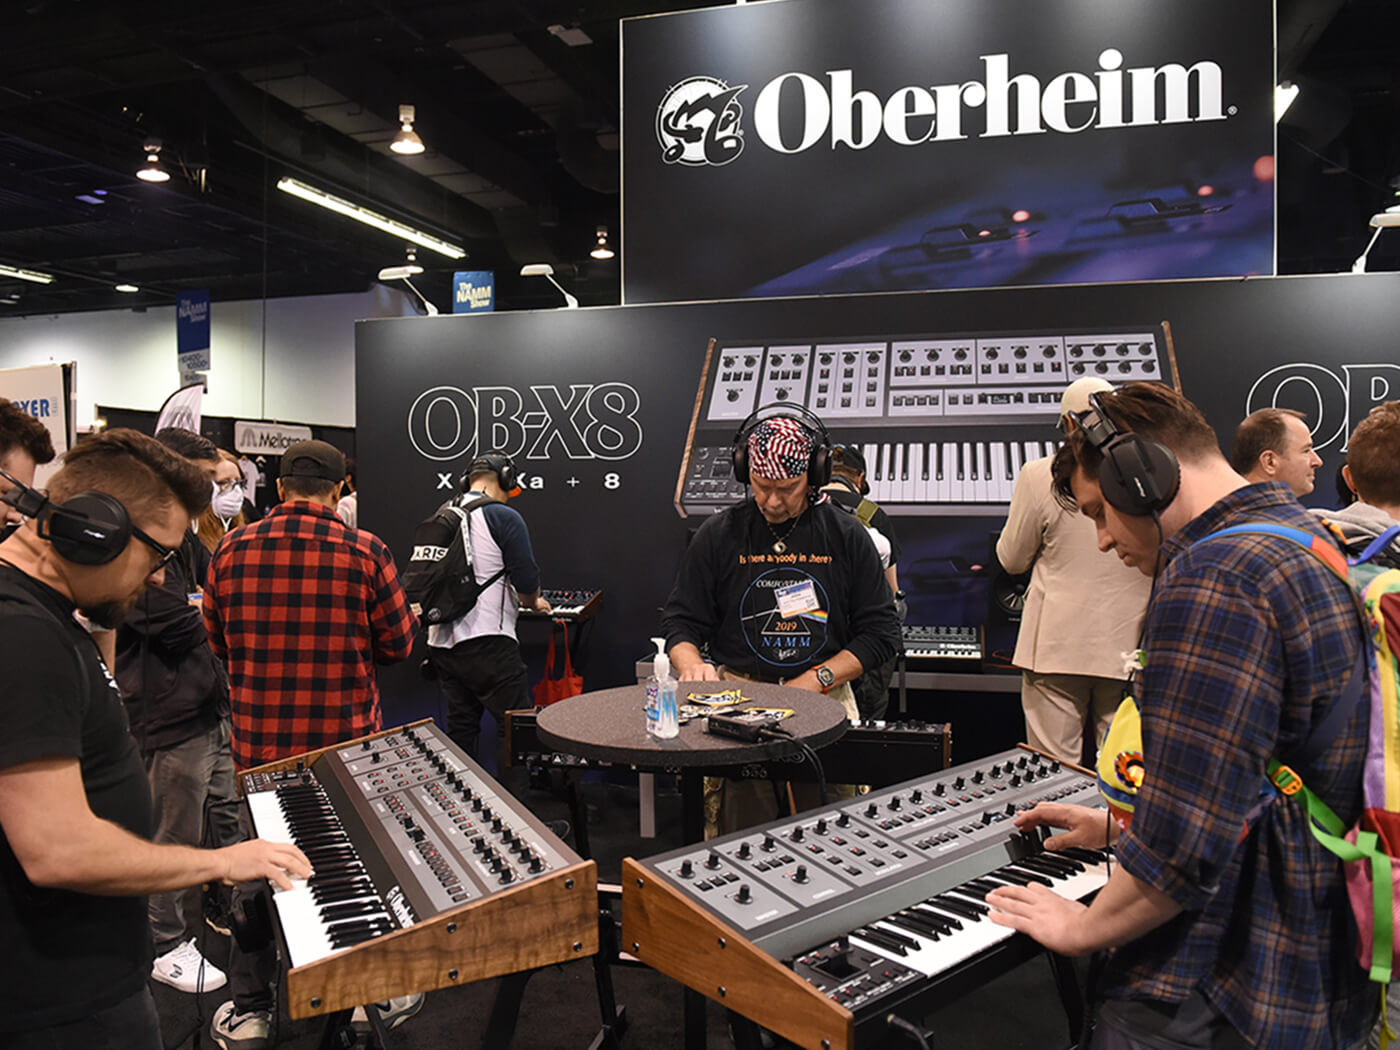 Attendees demo the OB-X8 synthesizer at the Oberheim booth during the NAMM show in 2022, photo by Chris Williams/Icon Sportswire via Getty Images